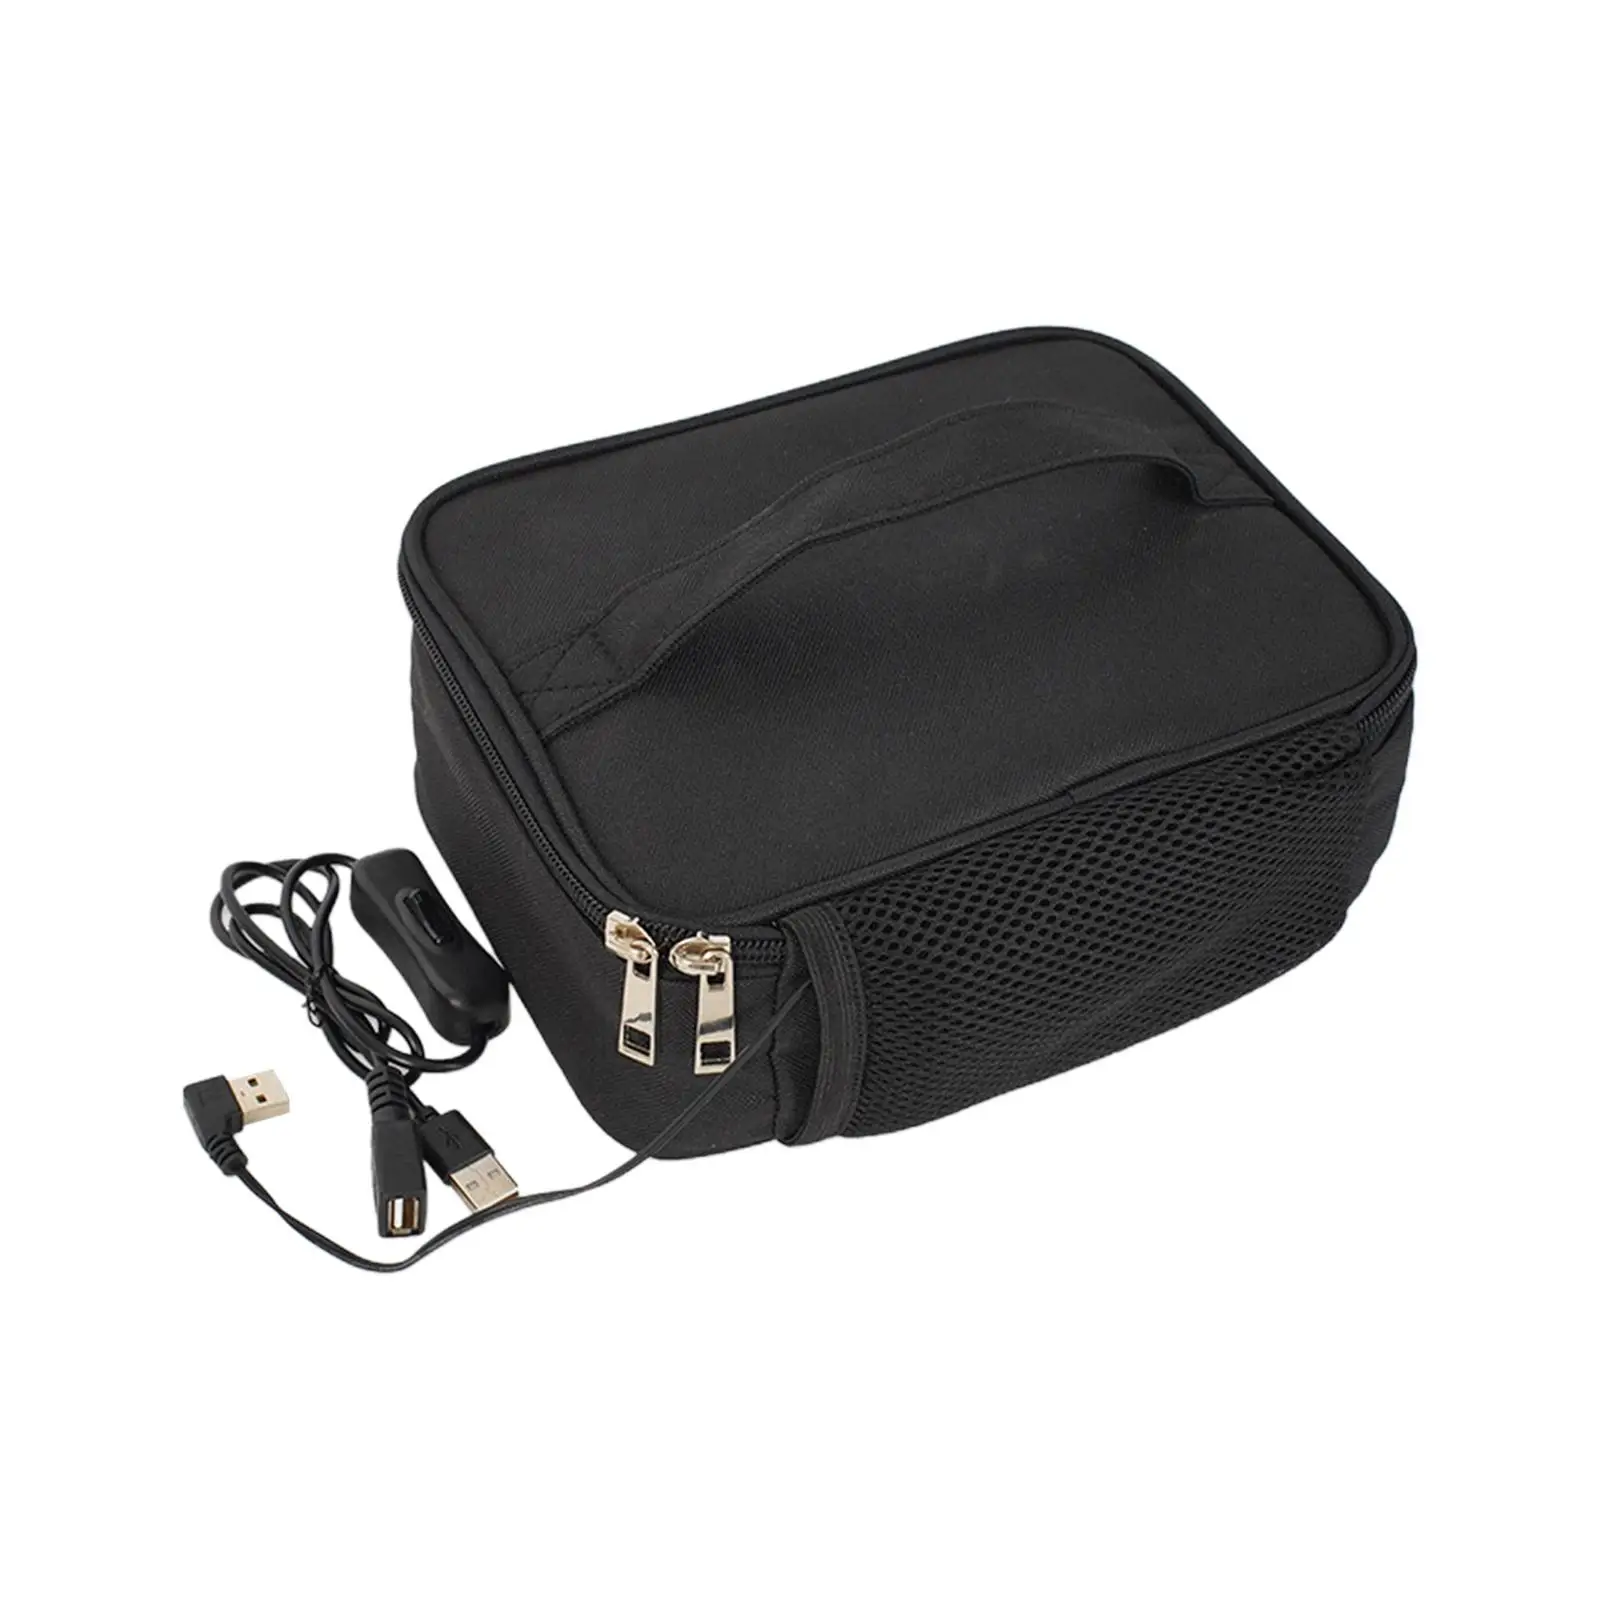 Electric Heating Bag Lunch Box Thermal Bag Insulation Bag Container Waterproof USB for Travel Picnic Office